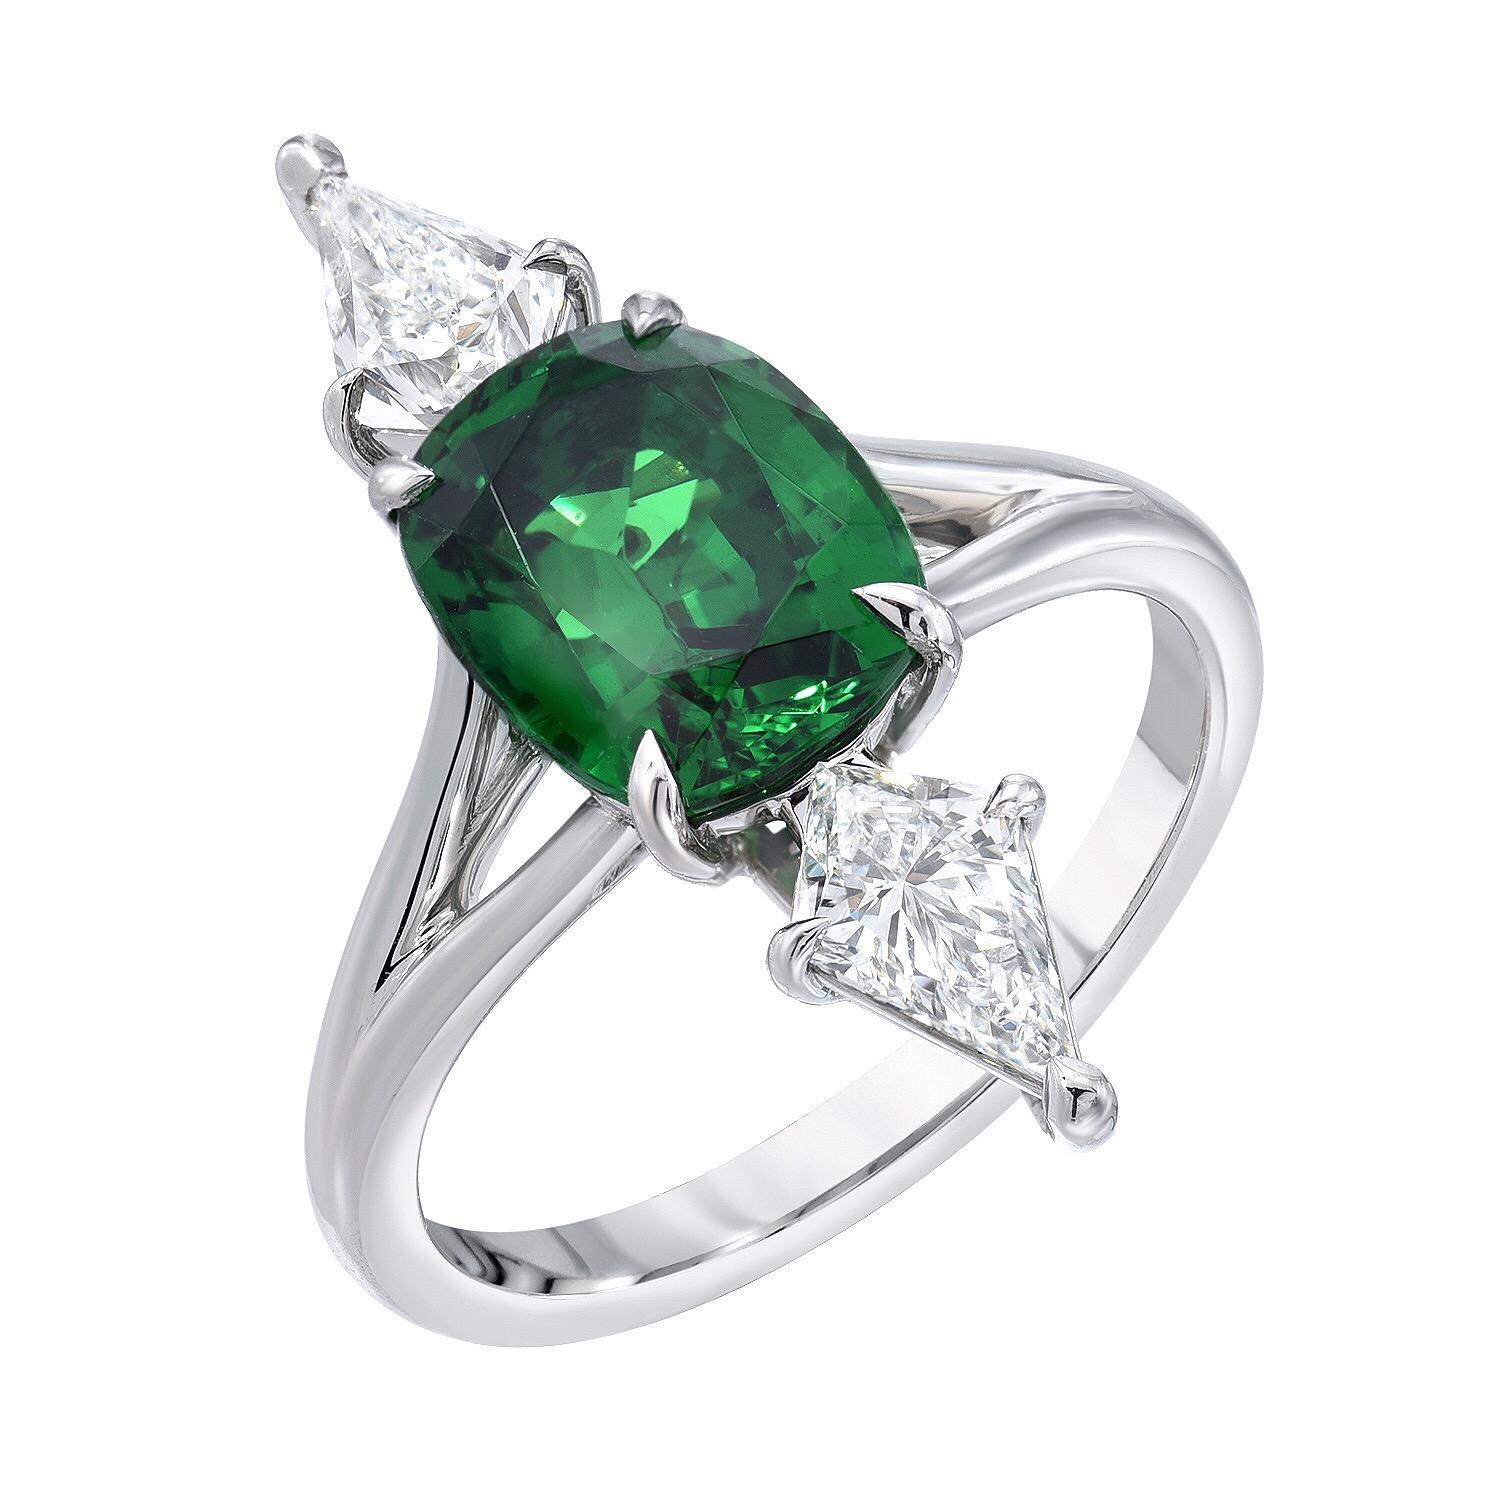 Ultra fine 2.70 carat cushion Tsavorite and 0.88 carats total kite shaped diamonds, E/VS, are set in this magnificent vertical platinum ring.
Size 6. Re-sizing is complimentary upon request.
Crafted by extremely skilled hands in the USA.
Signed